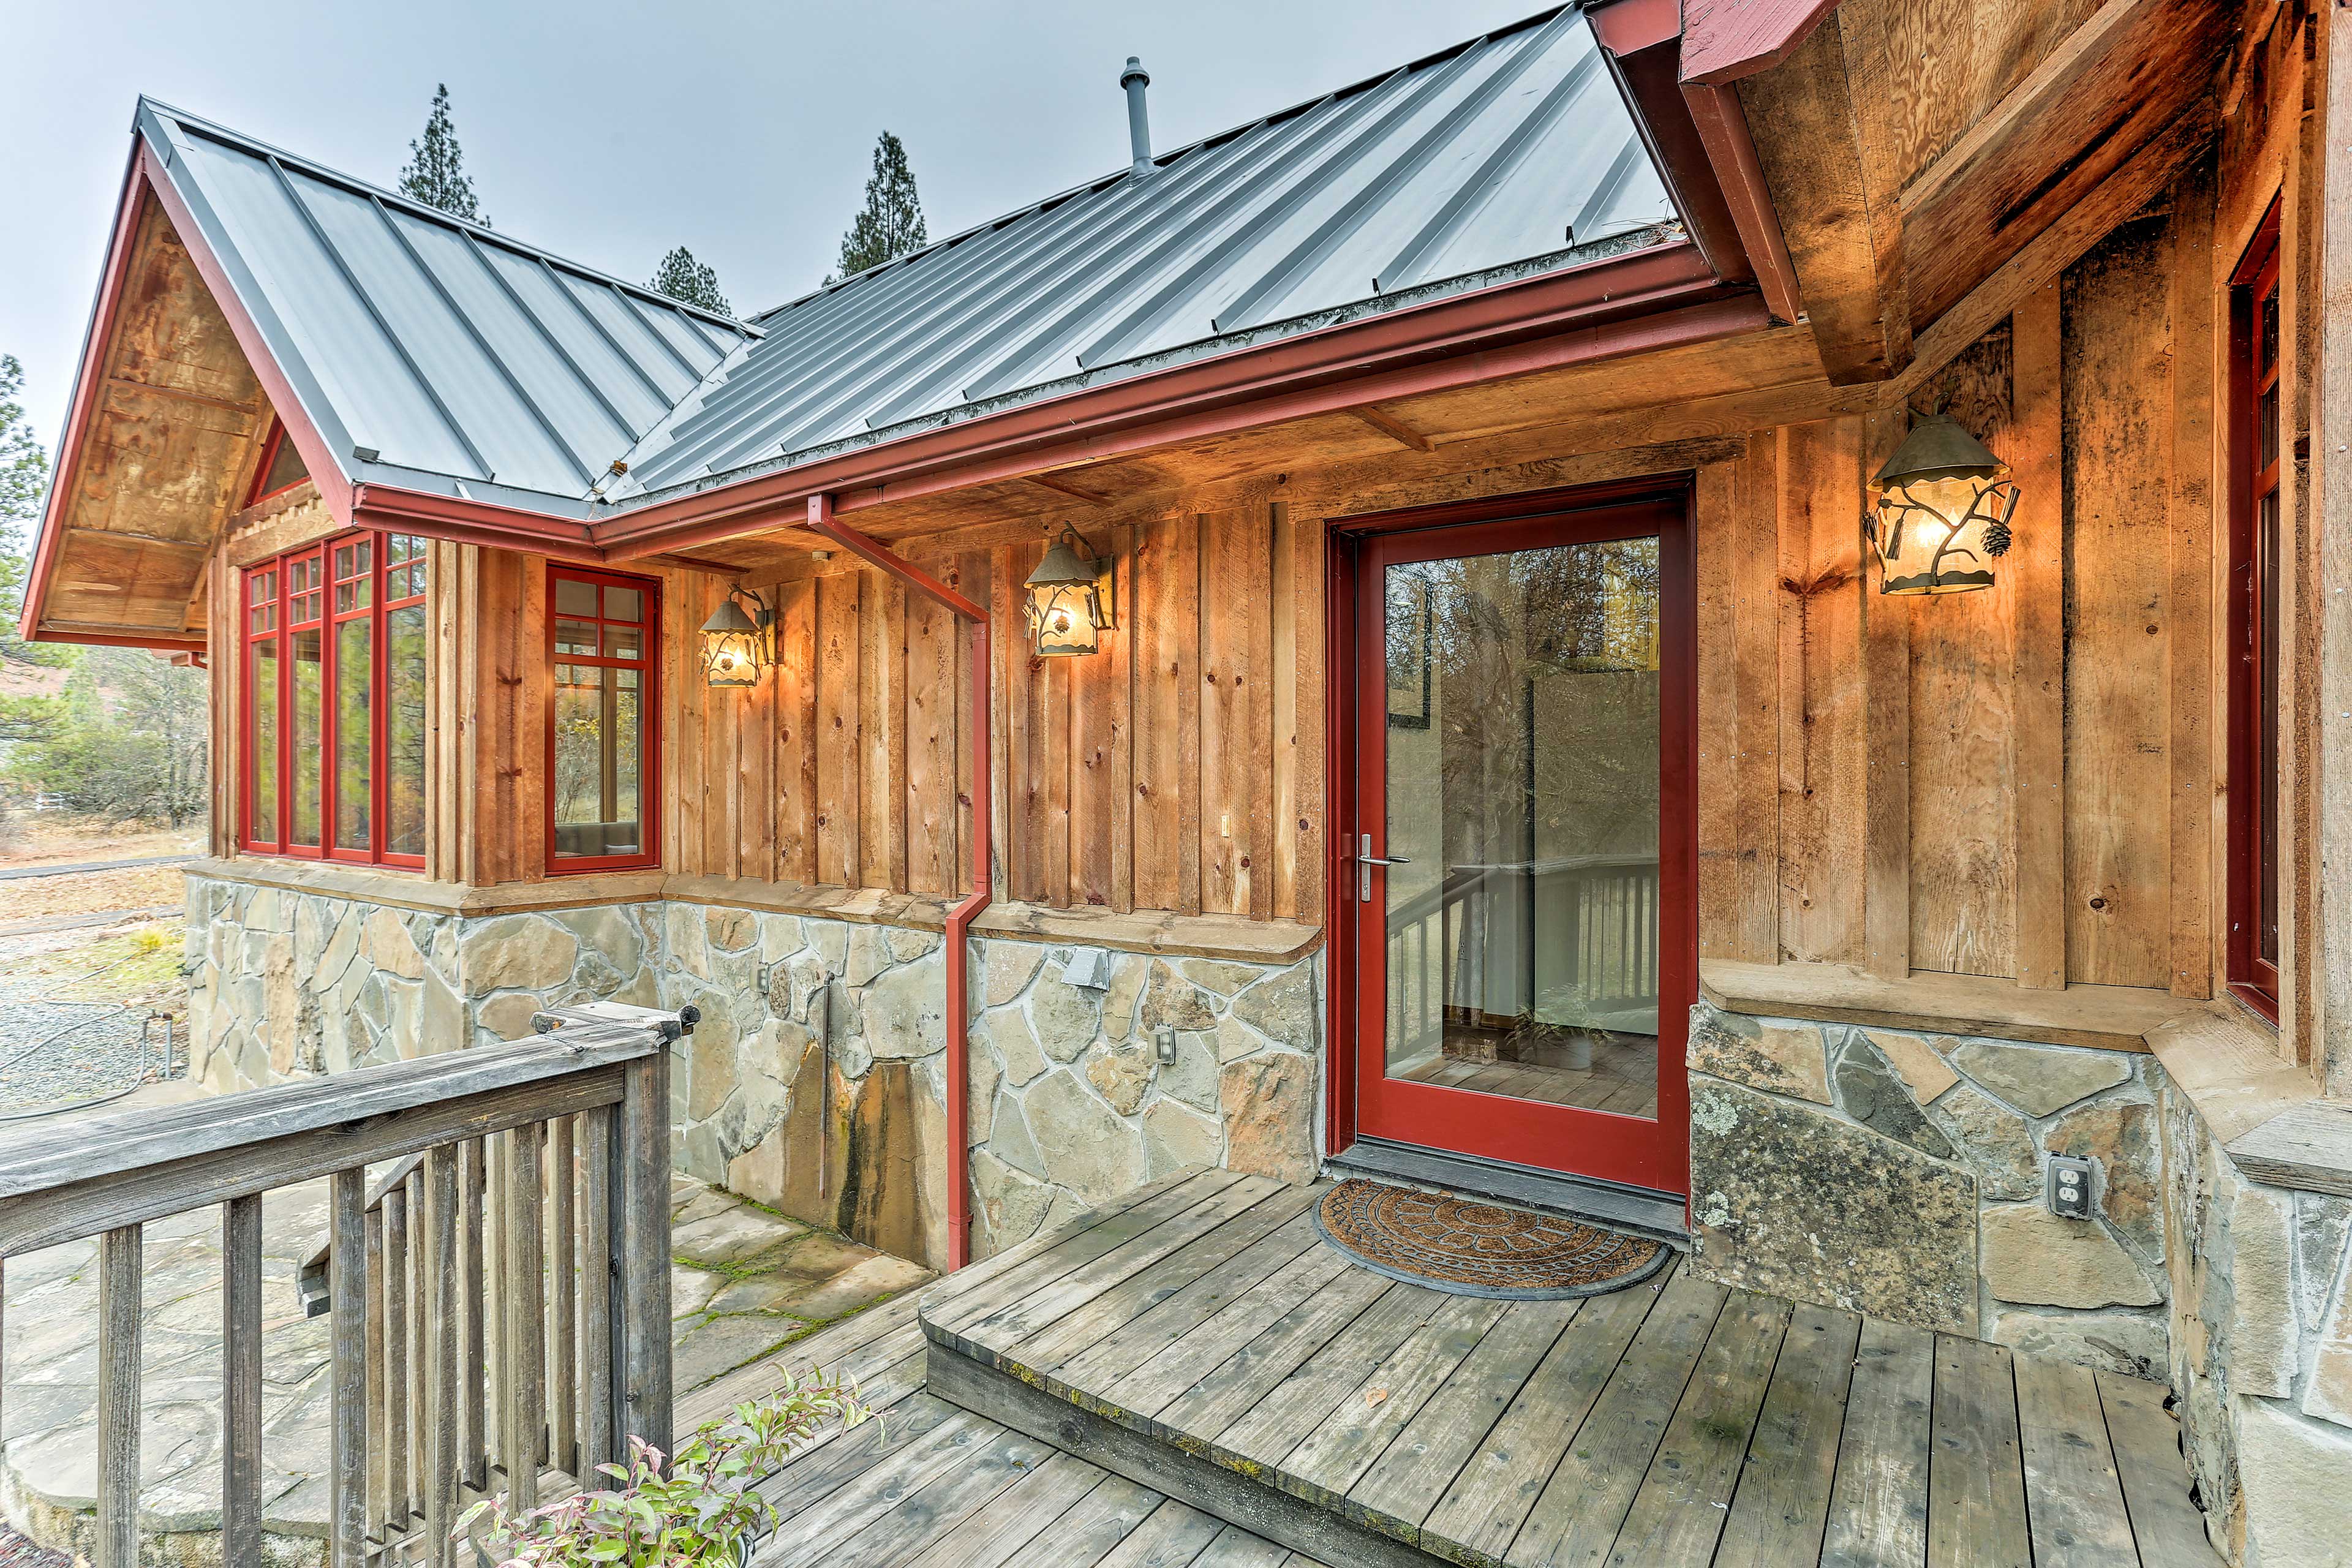 The cabin boasts tasteful pops of red across the exterior.